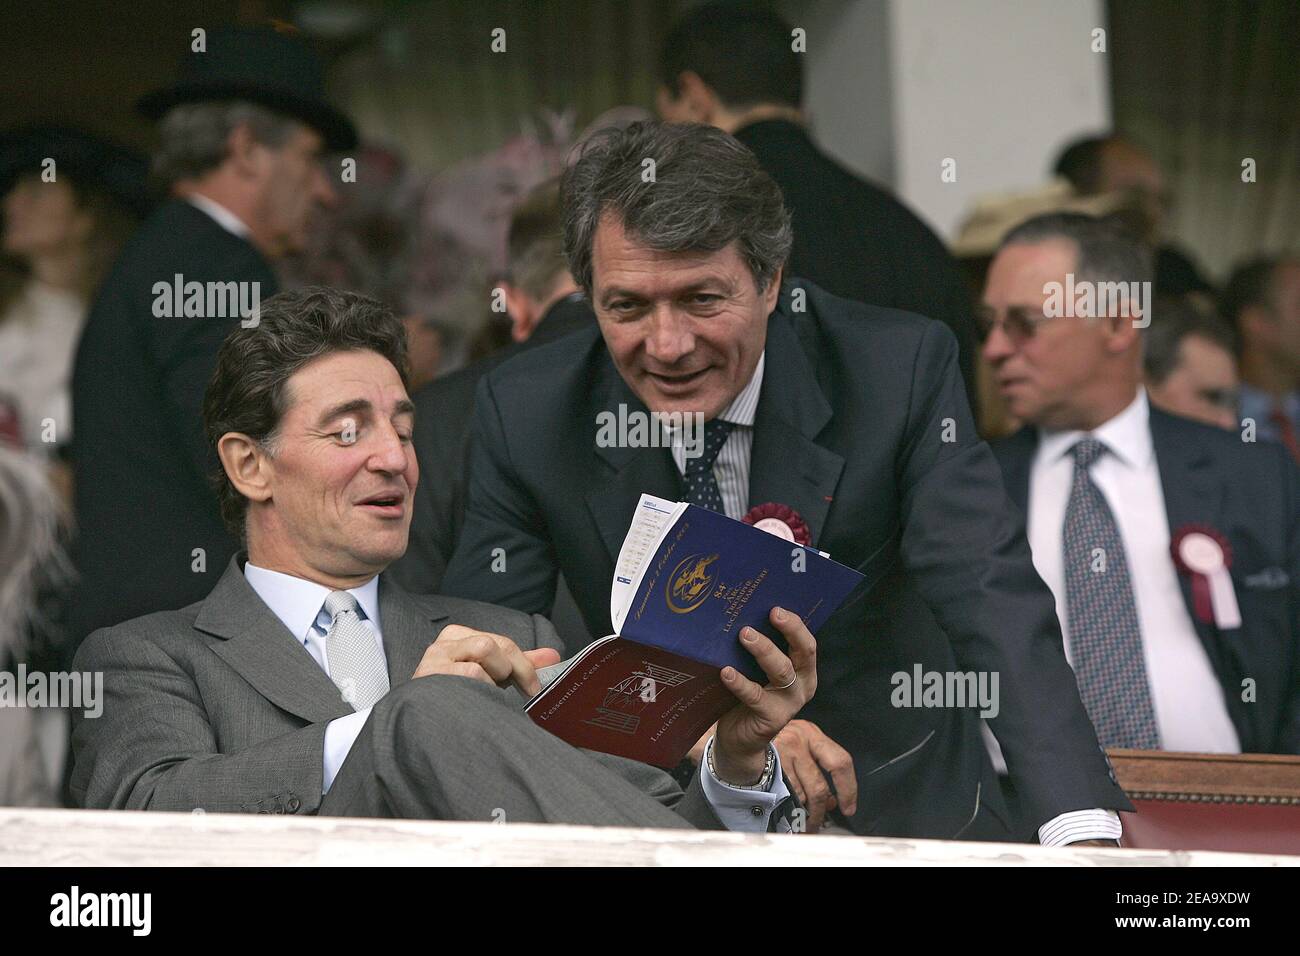 Edouard de Rothschild, France Galop president and Deauville mayor Philippe Augier attend the 84th Prix de l'Arc de Triomphe horse race at the Longchamp race track in Paris, France on October 2, 2005. Photo by Orban-Zabulon/ABACAPRESS.COM Stock Photo